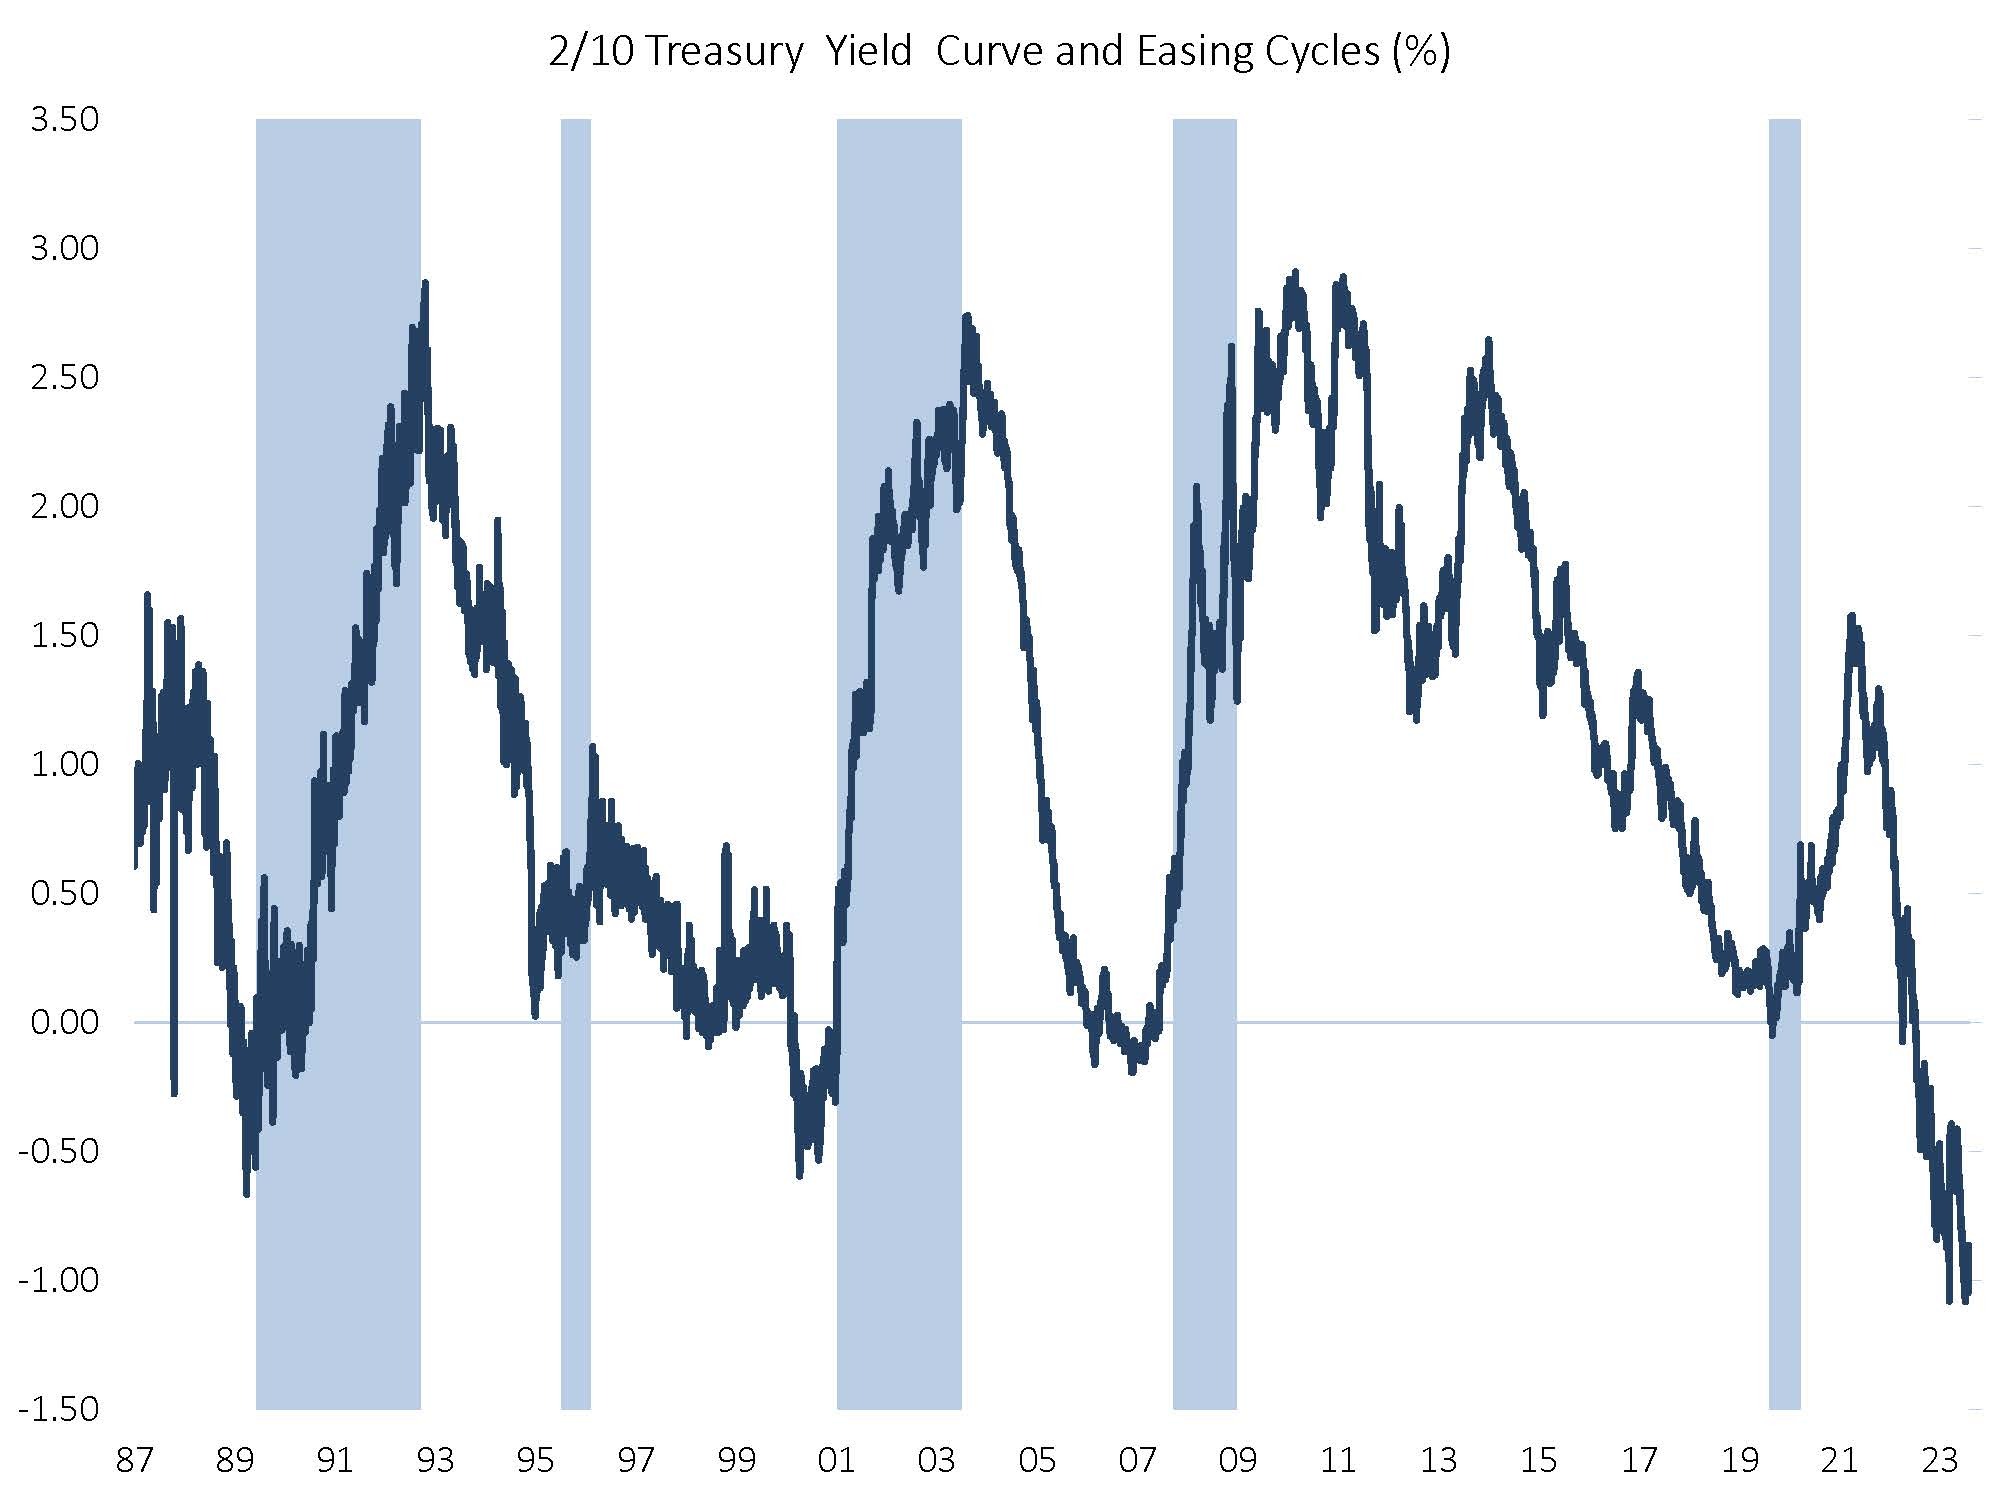 2/10 Treasury Yield Curve and Easing Cycles Percentage